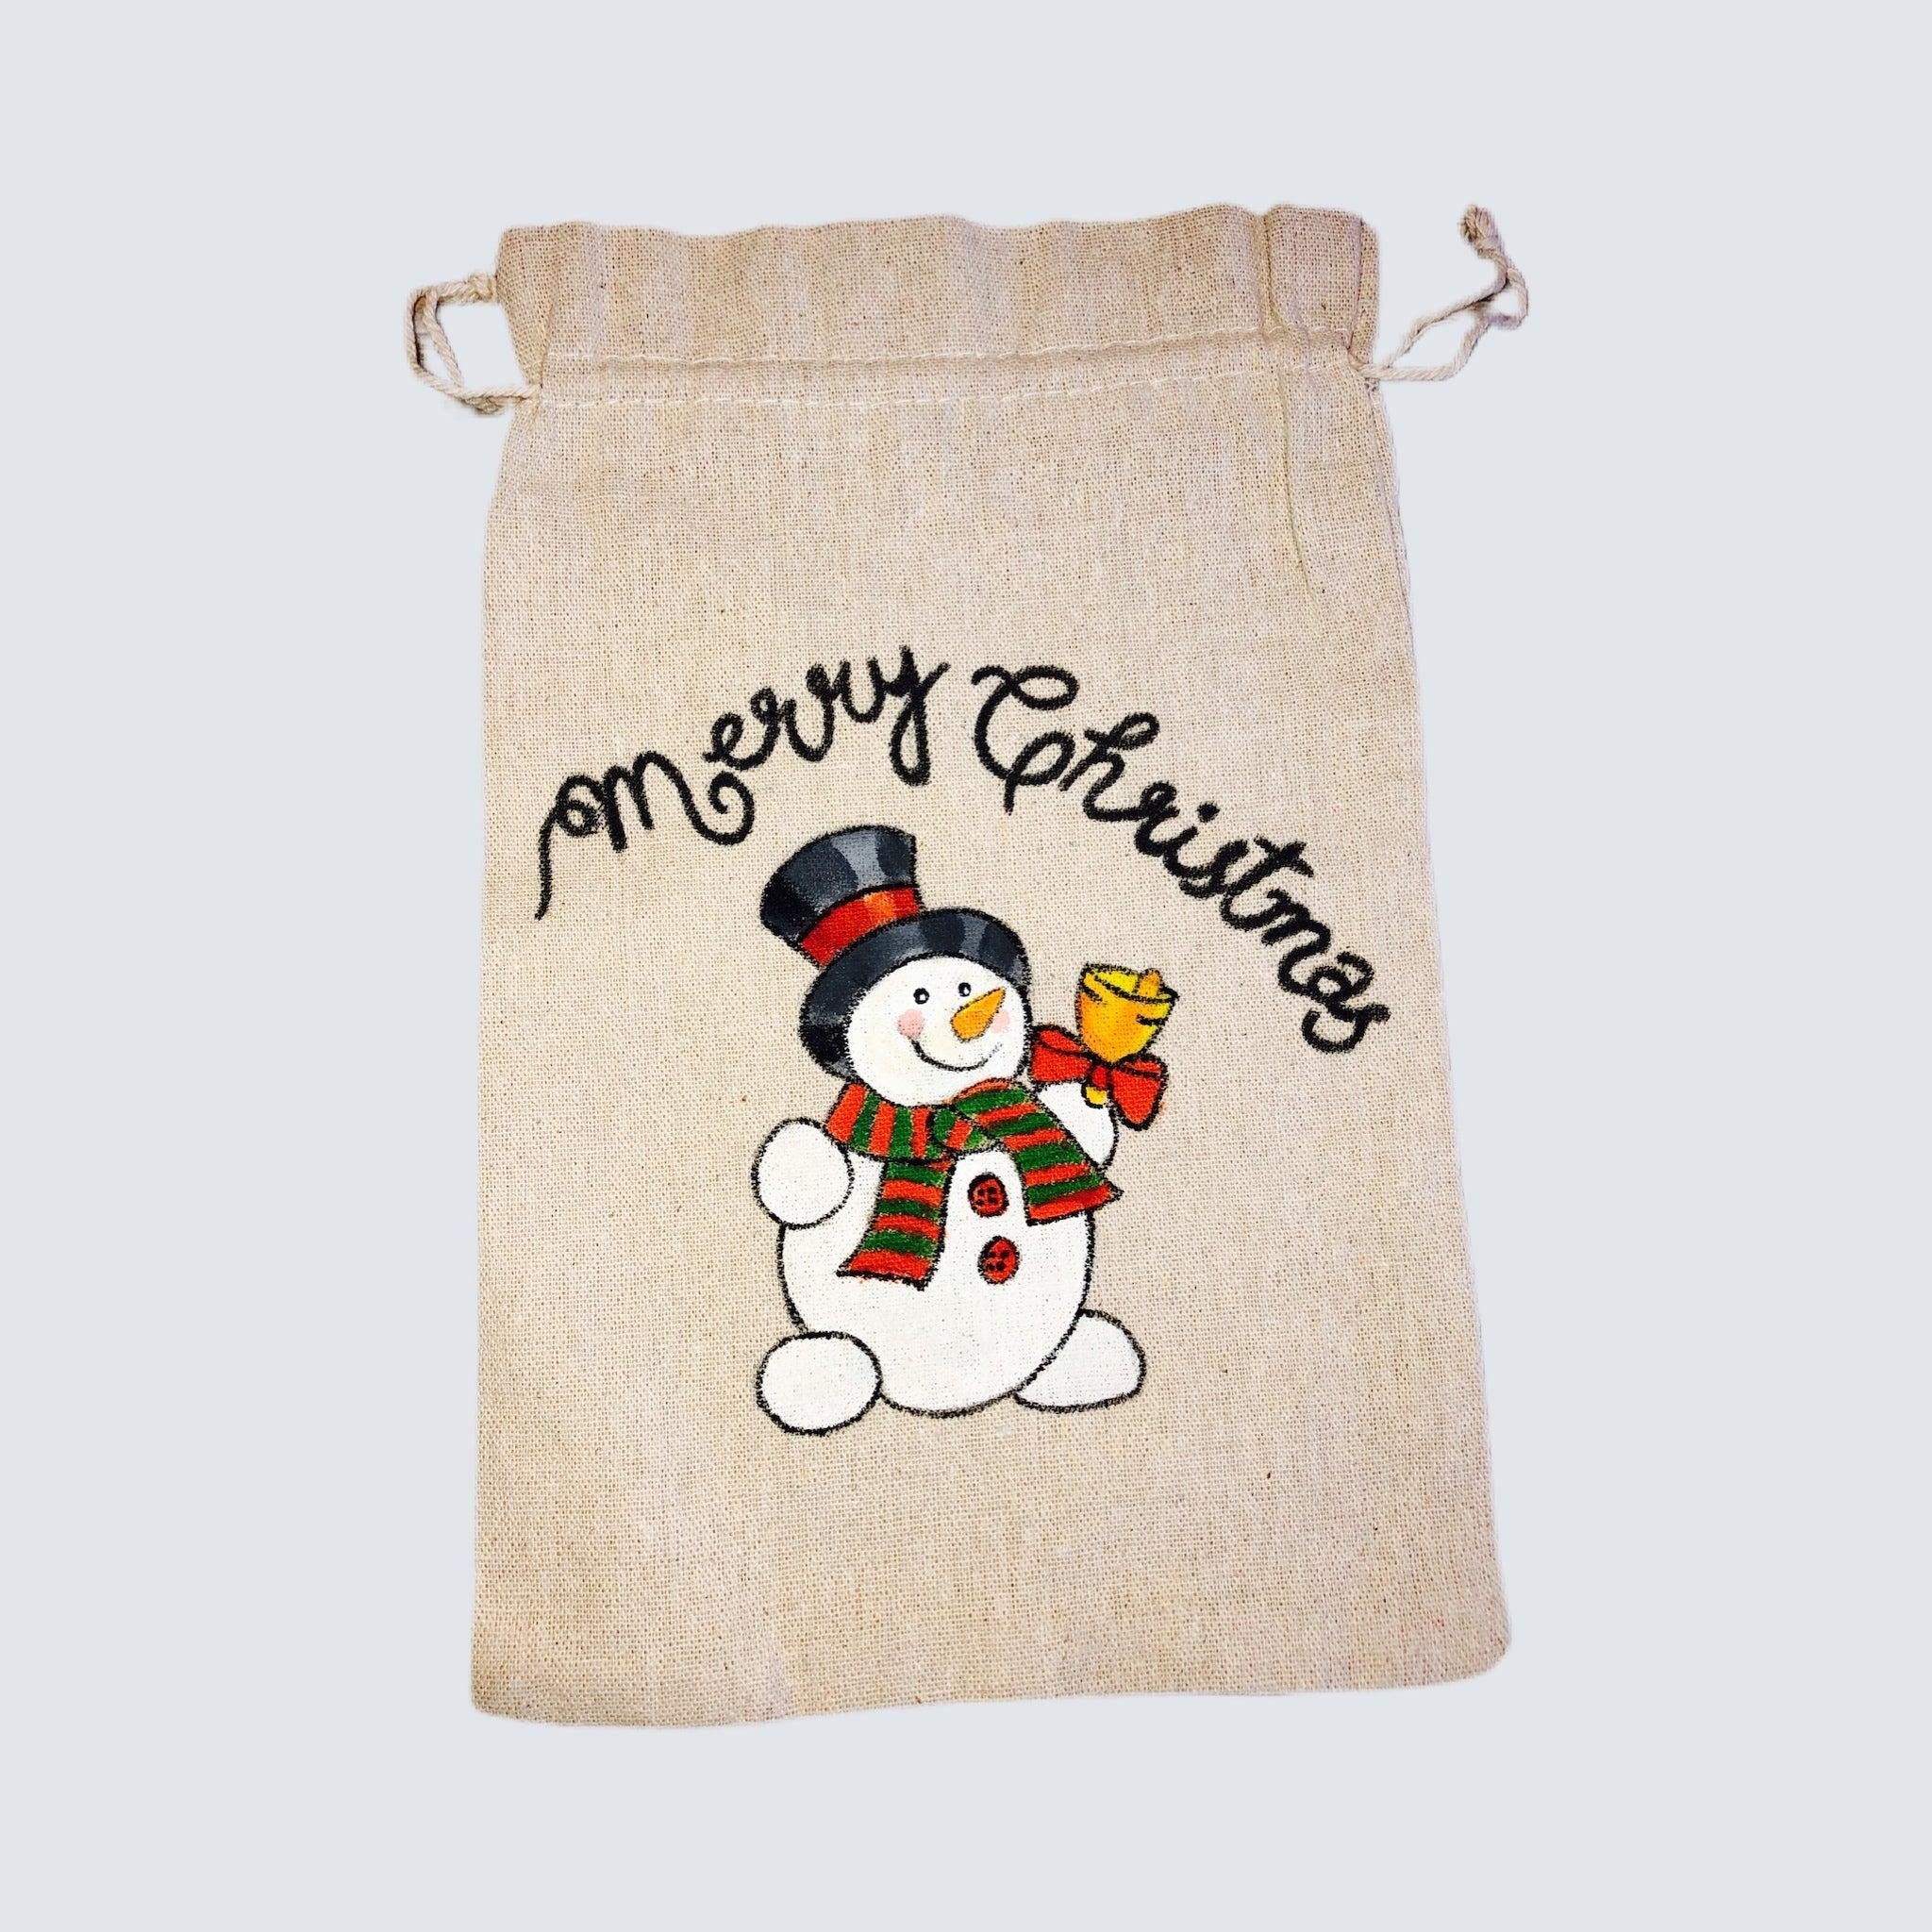 Hand-painted Christmas Gift Pouch - Large 19x28.5 cm Cotton Linen Bag with Drawstring